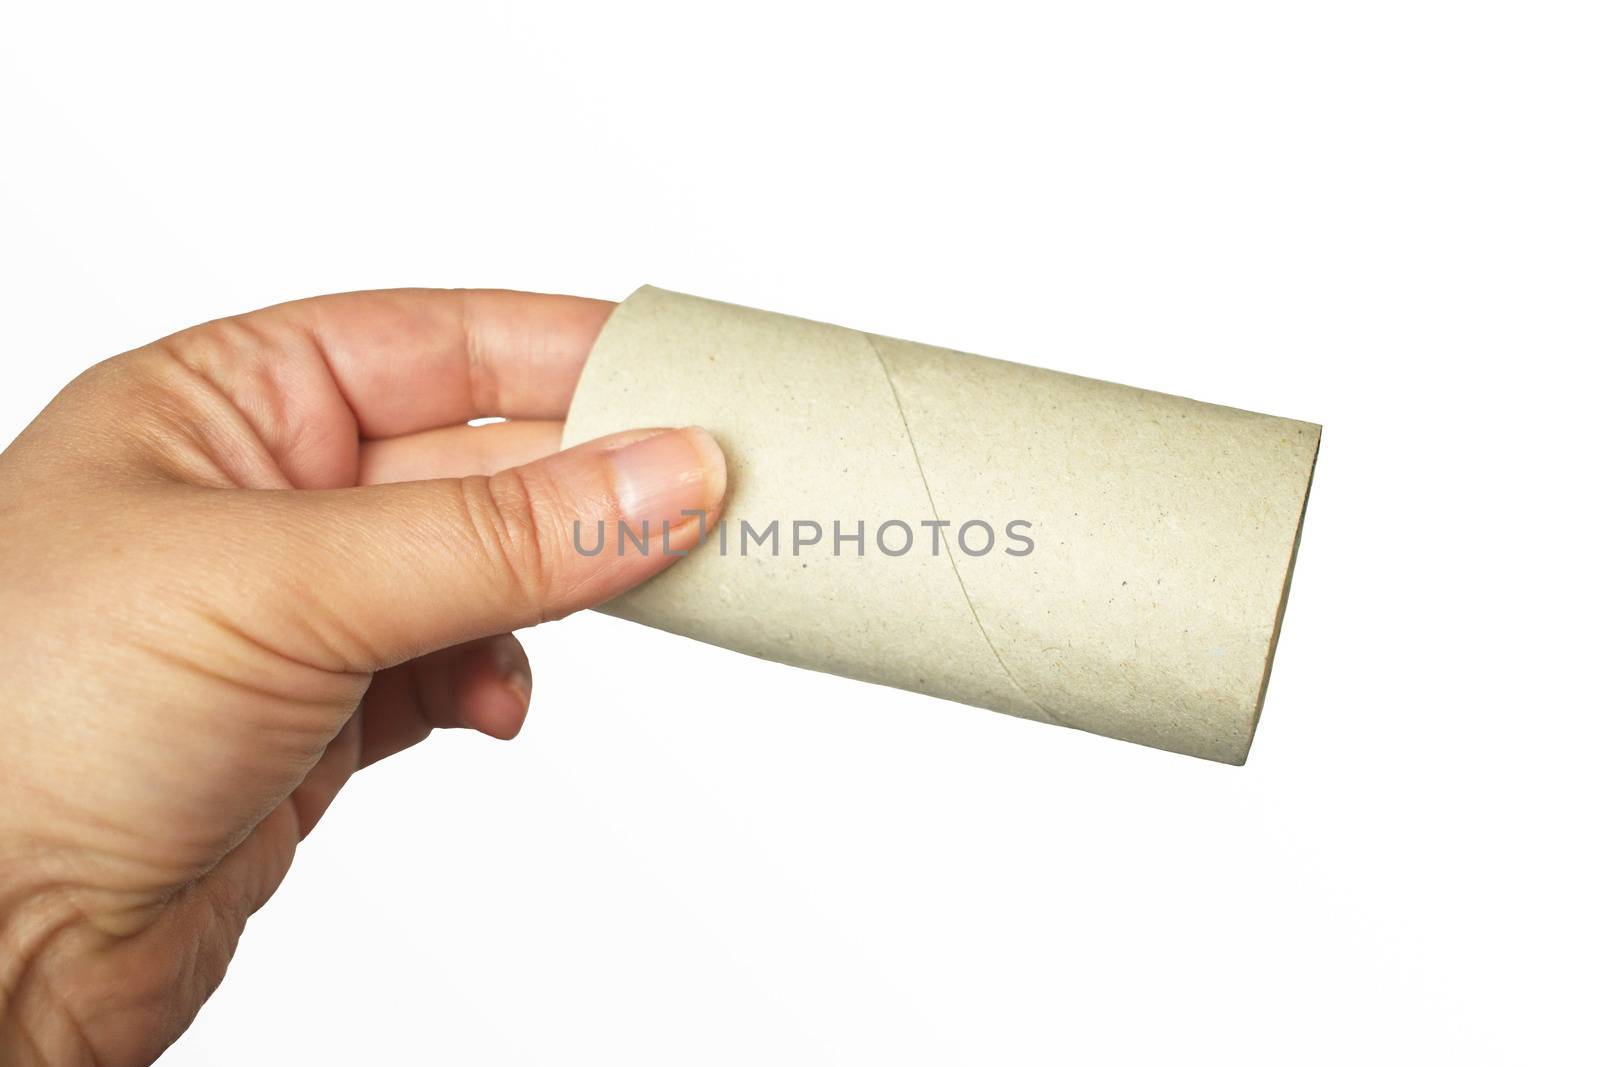 A hand hold a empty toilet paper roll